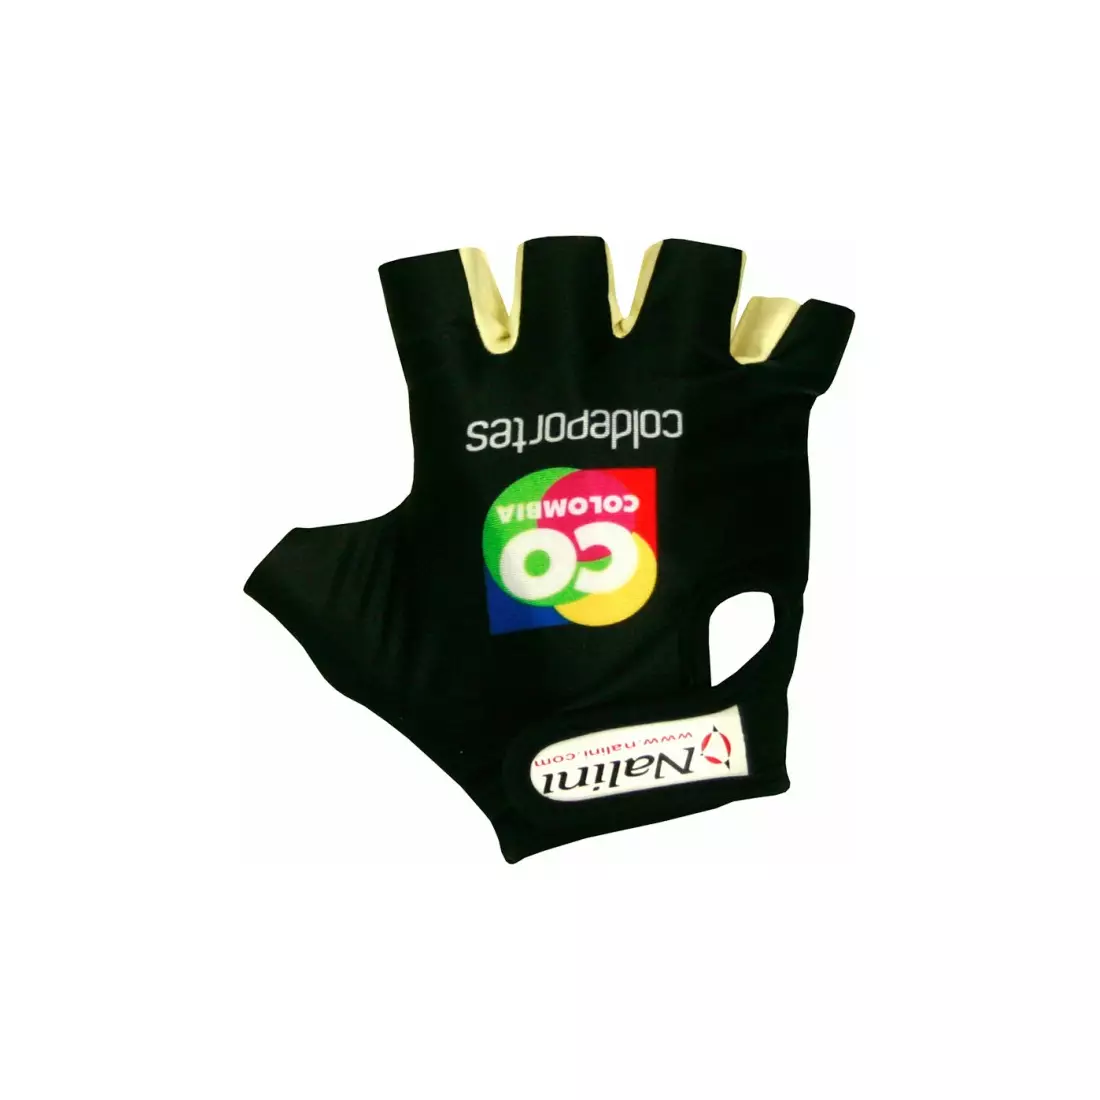 NALINI - TEAM COLOMBIA 2013 - cycling gloves